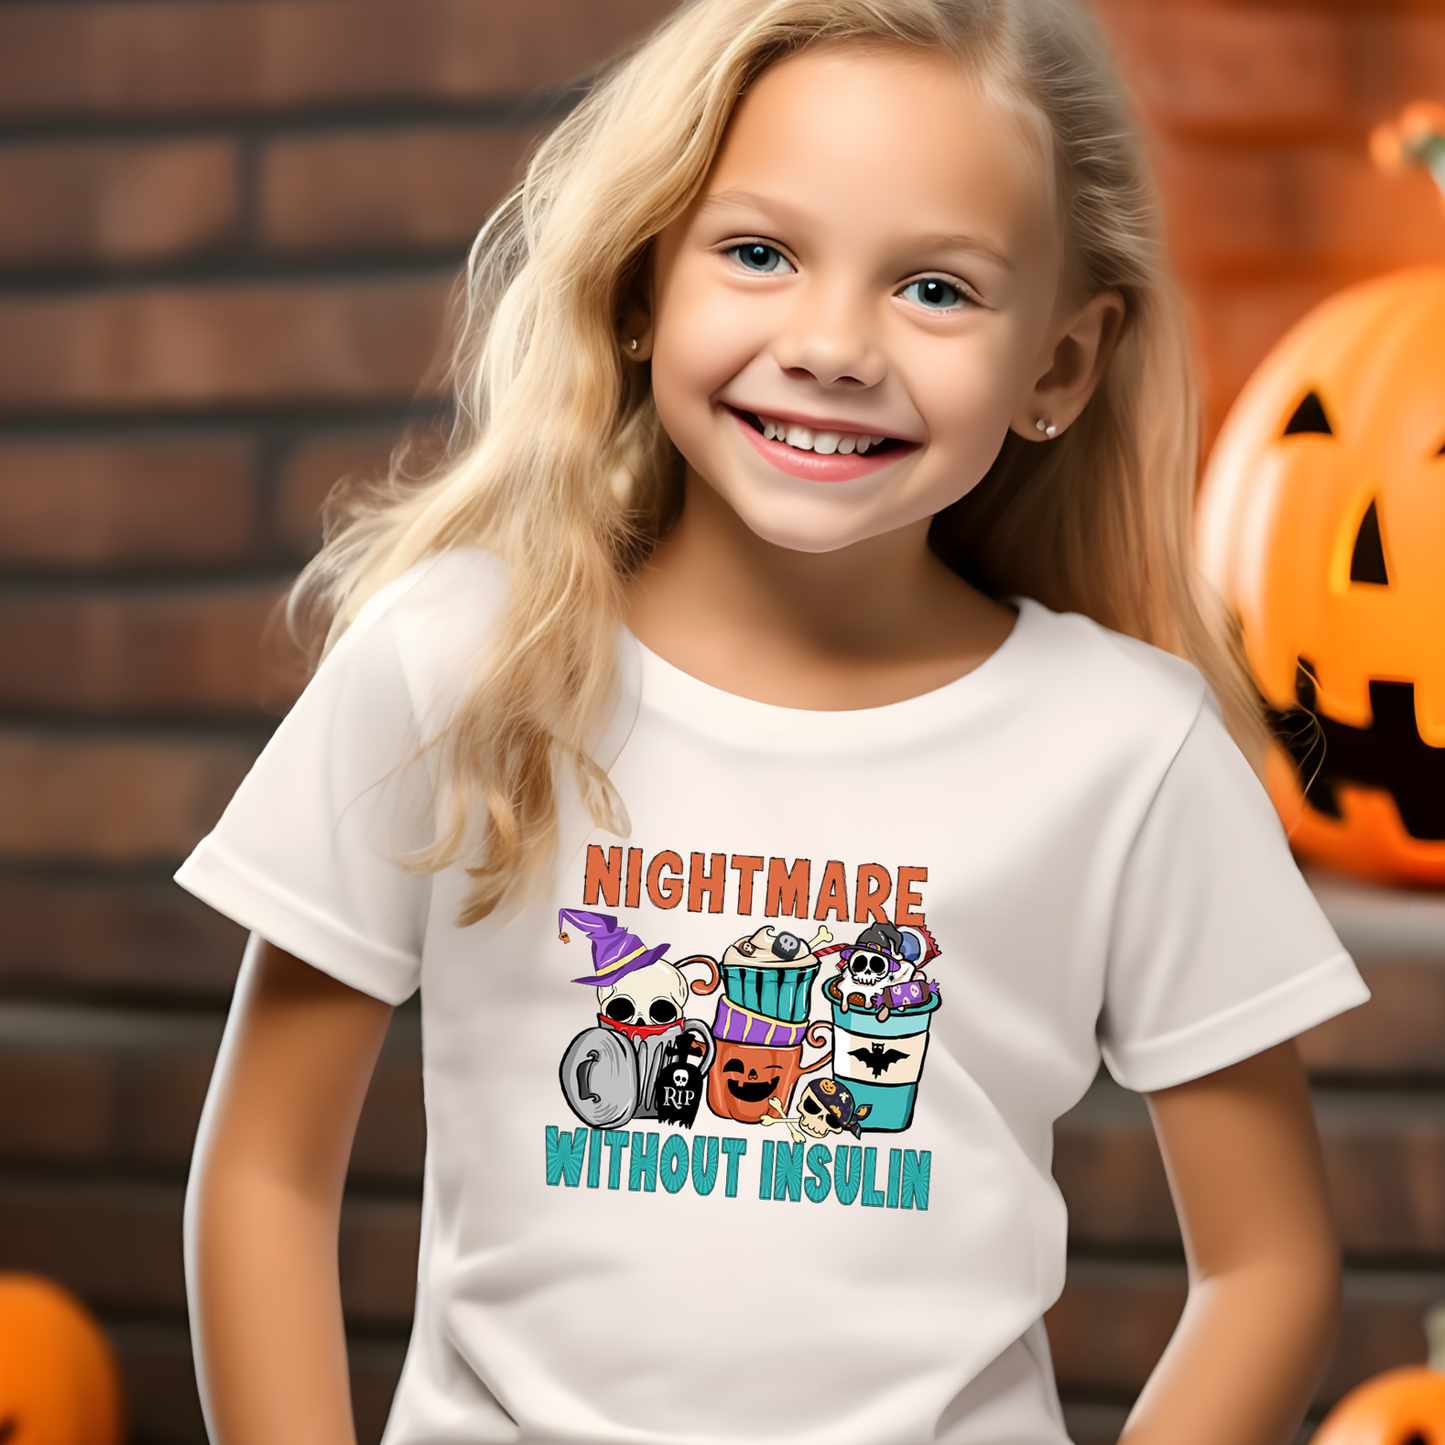 Nightmare without insulin - Kids Unisex T-Shirt